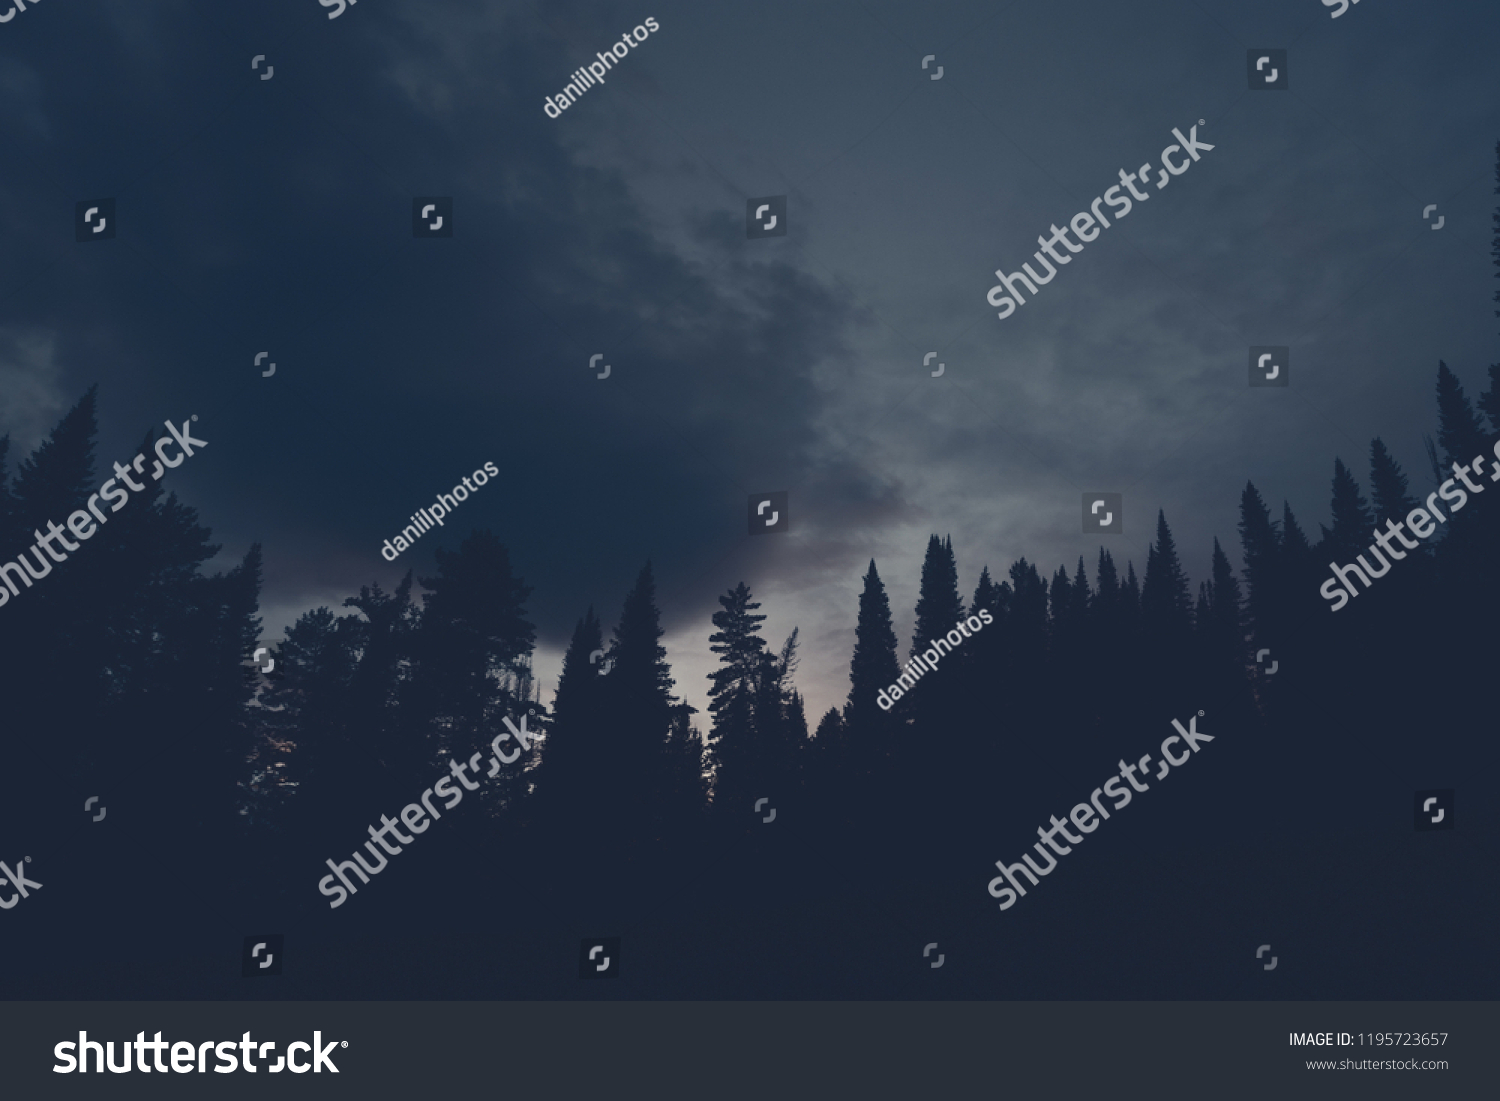 Dark silhouettes of high pines and spruces from below upwards on background of cloudy sunset sky with copy space. Coniferous trees close up in navy blue tones. Eerie atmospheric landscape. #1195723657